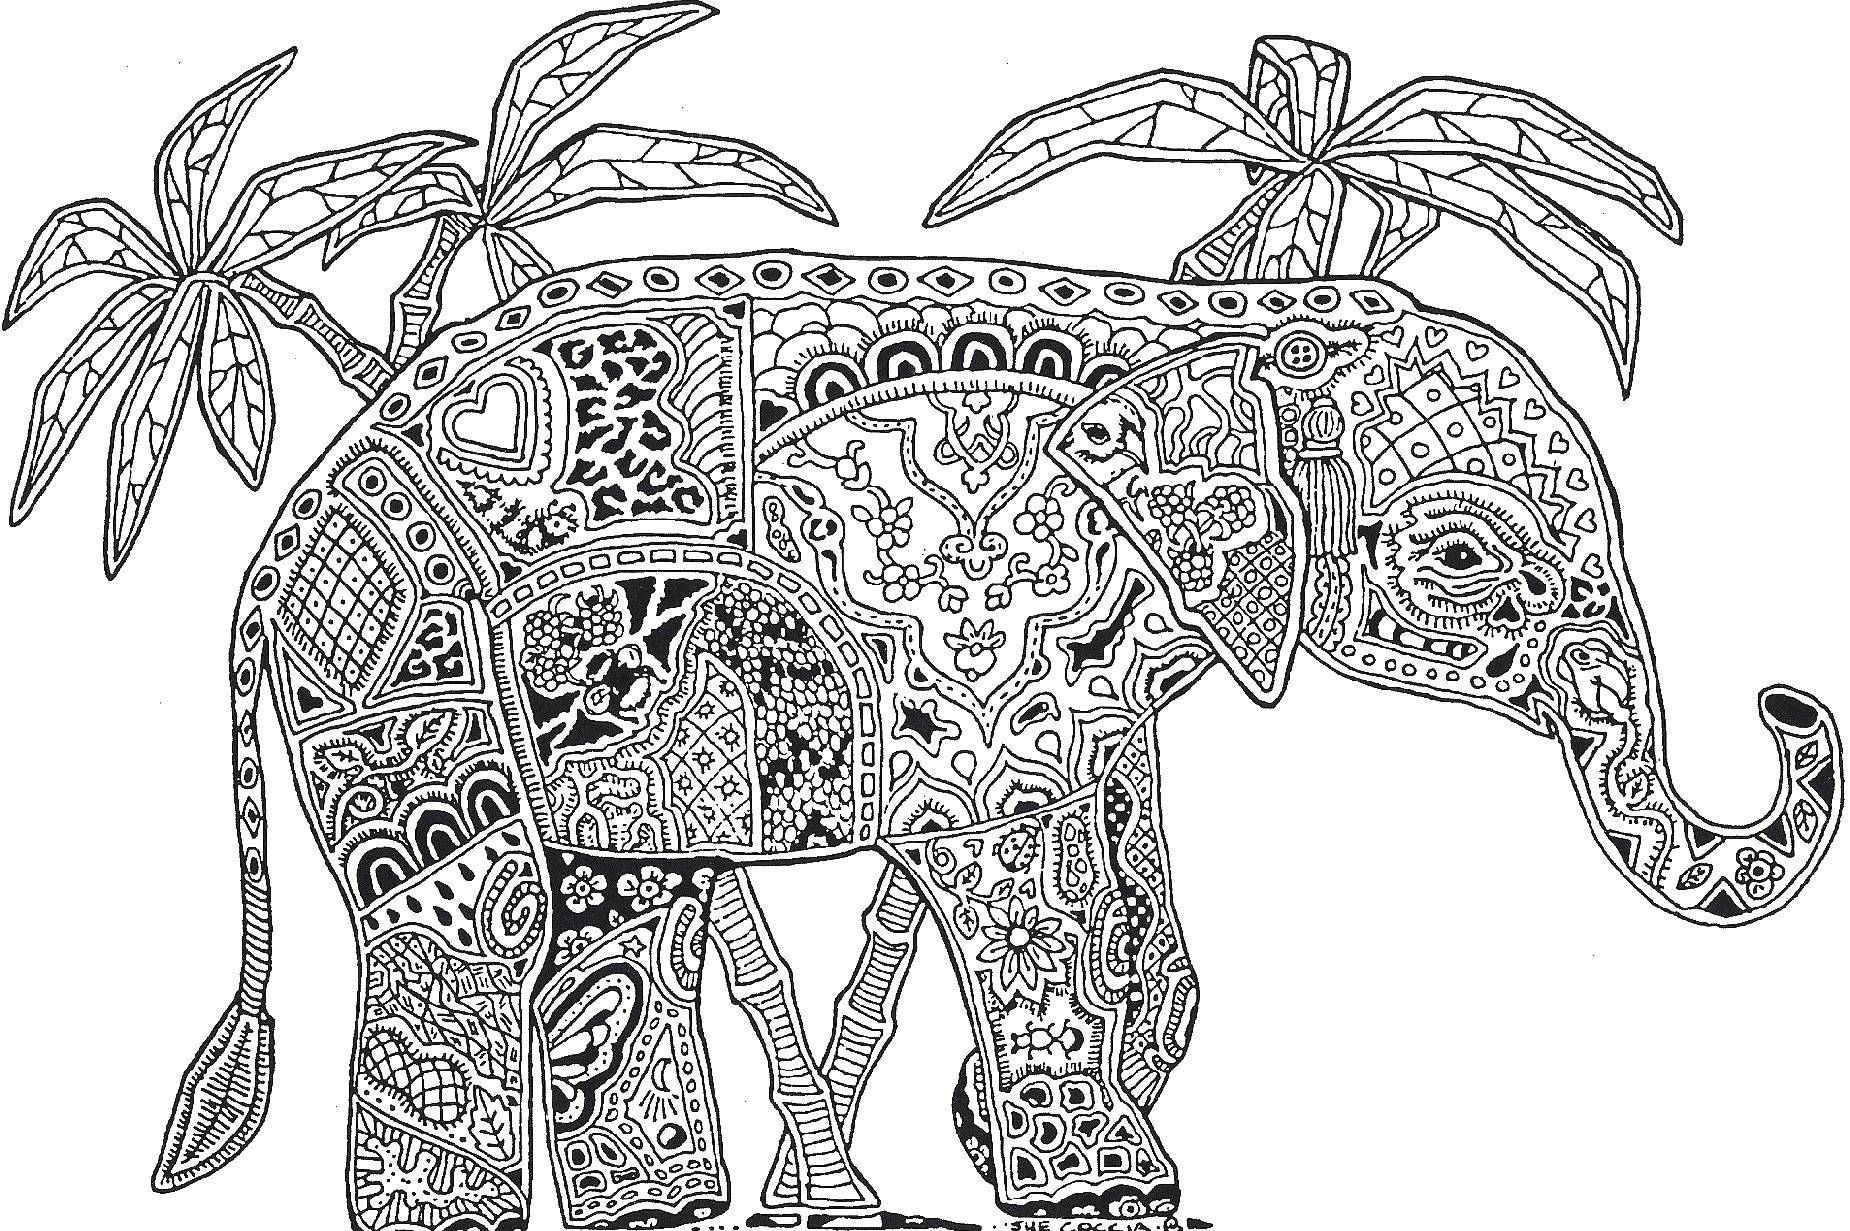 Coloring Elephant, antisress. Category Bathroom with shower. Tags:  patterns, shapes, antistress, elephant.